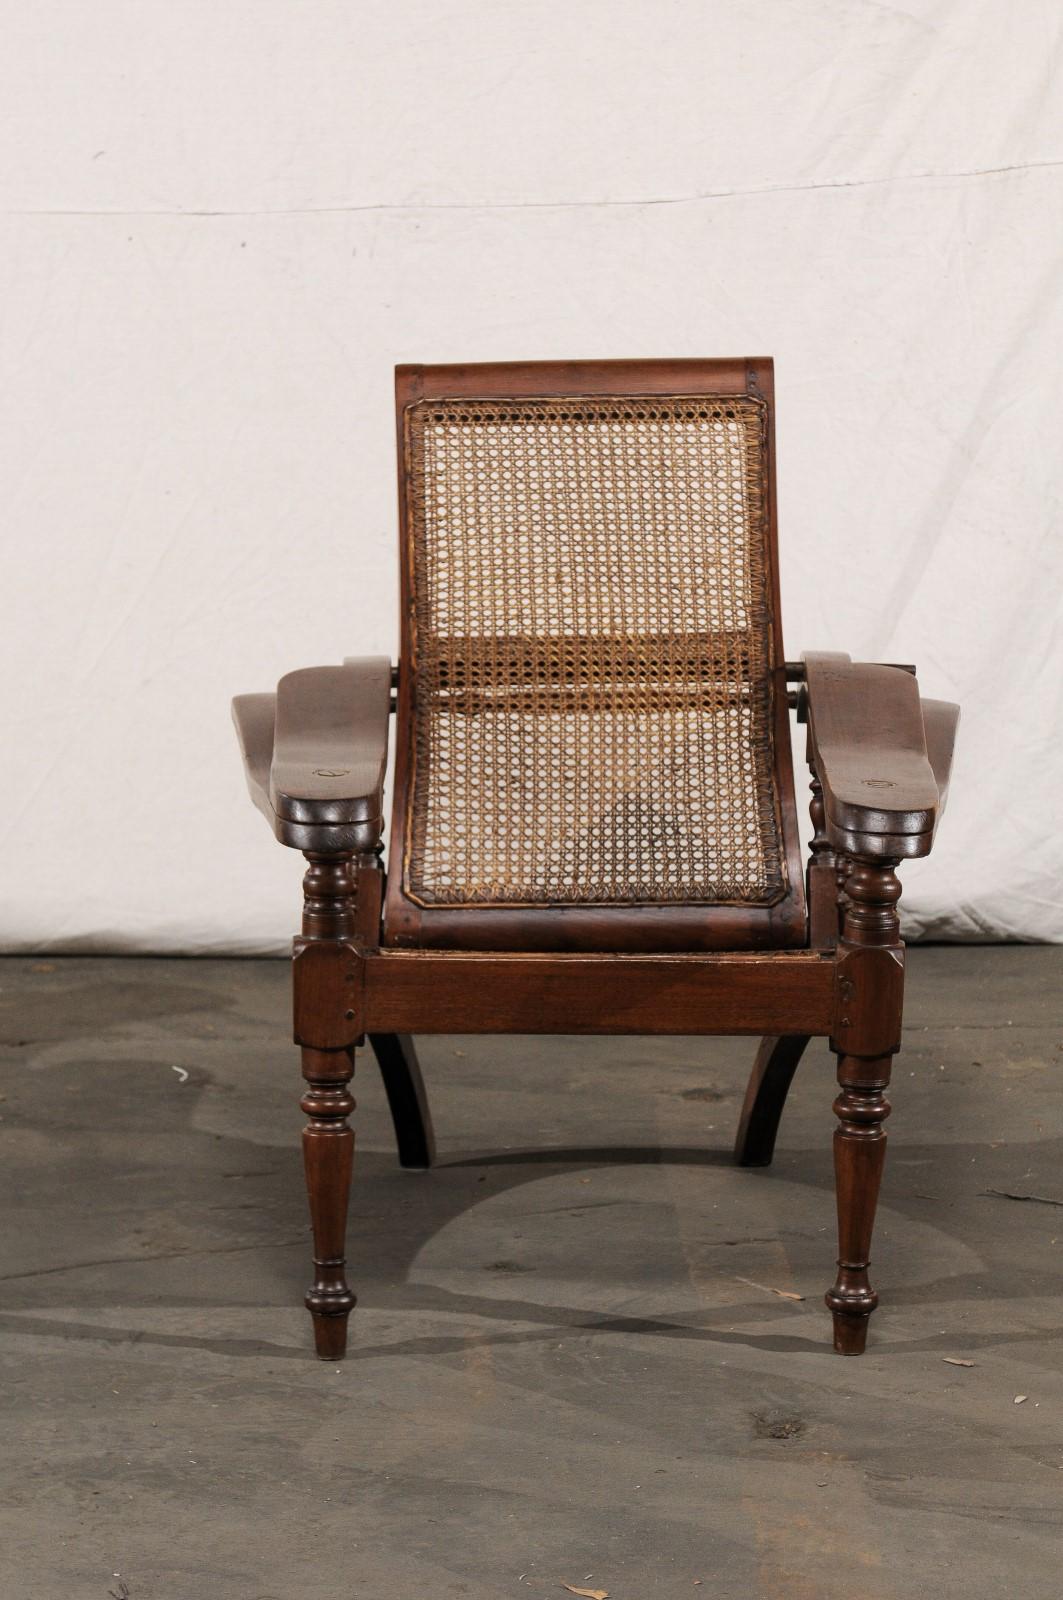 19th Century Anglo-Indian Caned Planters Chair with Leg Stretchers, Metamorphic 4